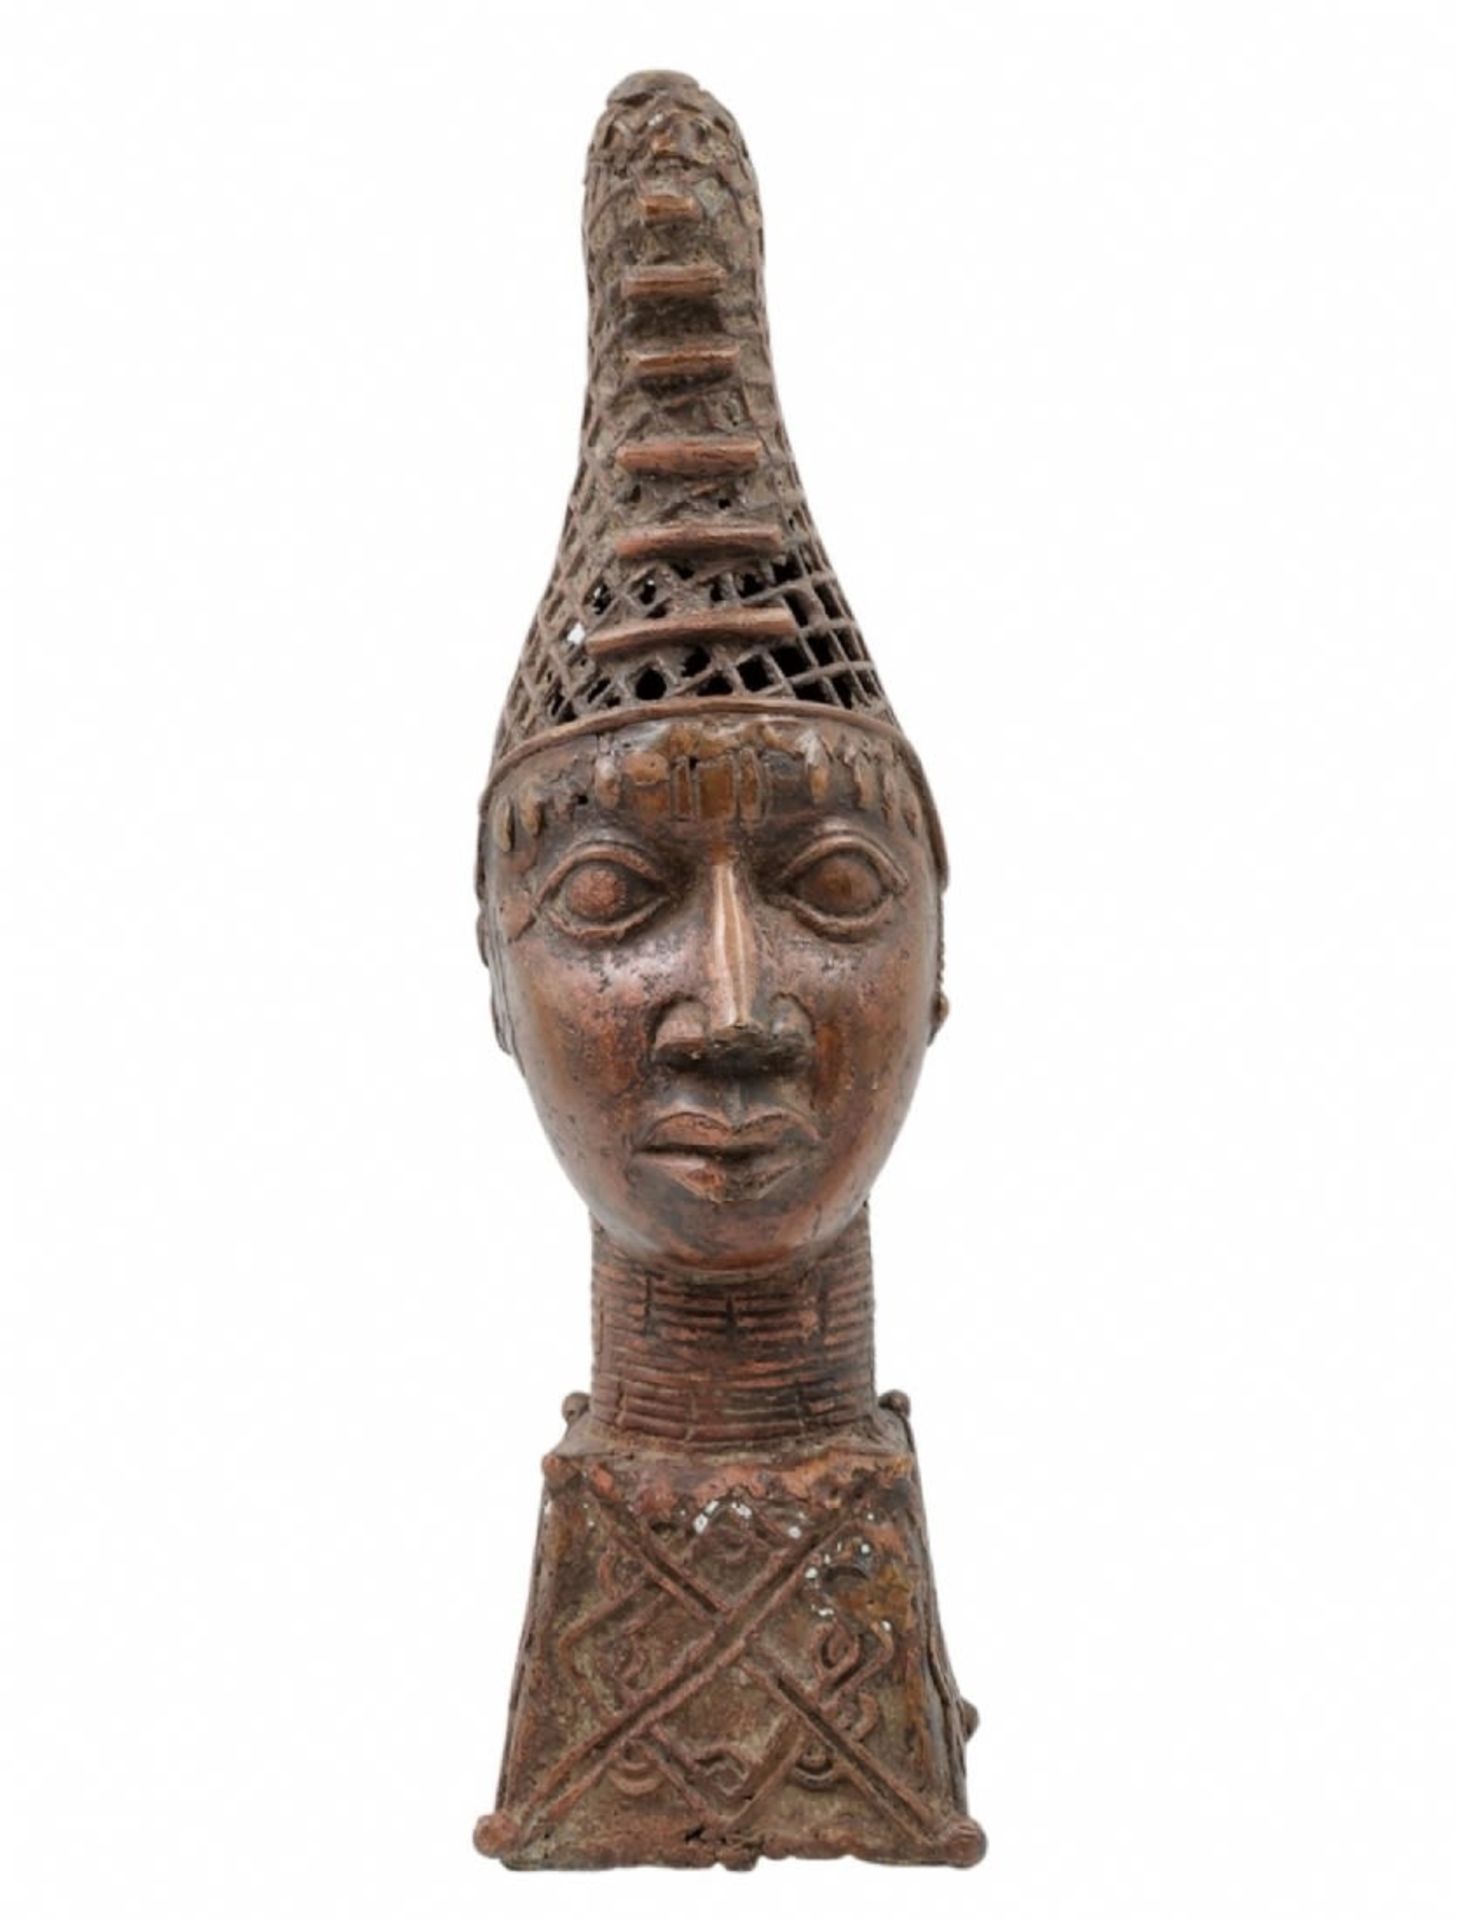 Antique African bronze statue, from the first third of the twentieth century, in the form of a